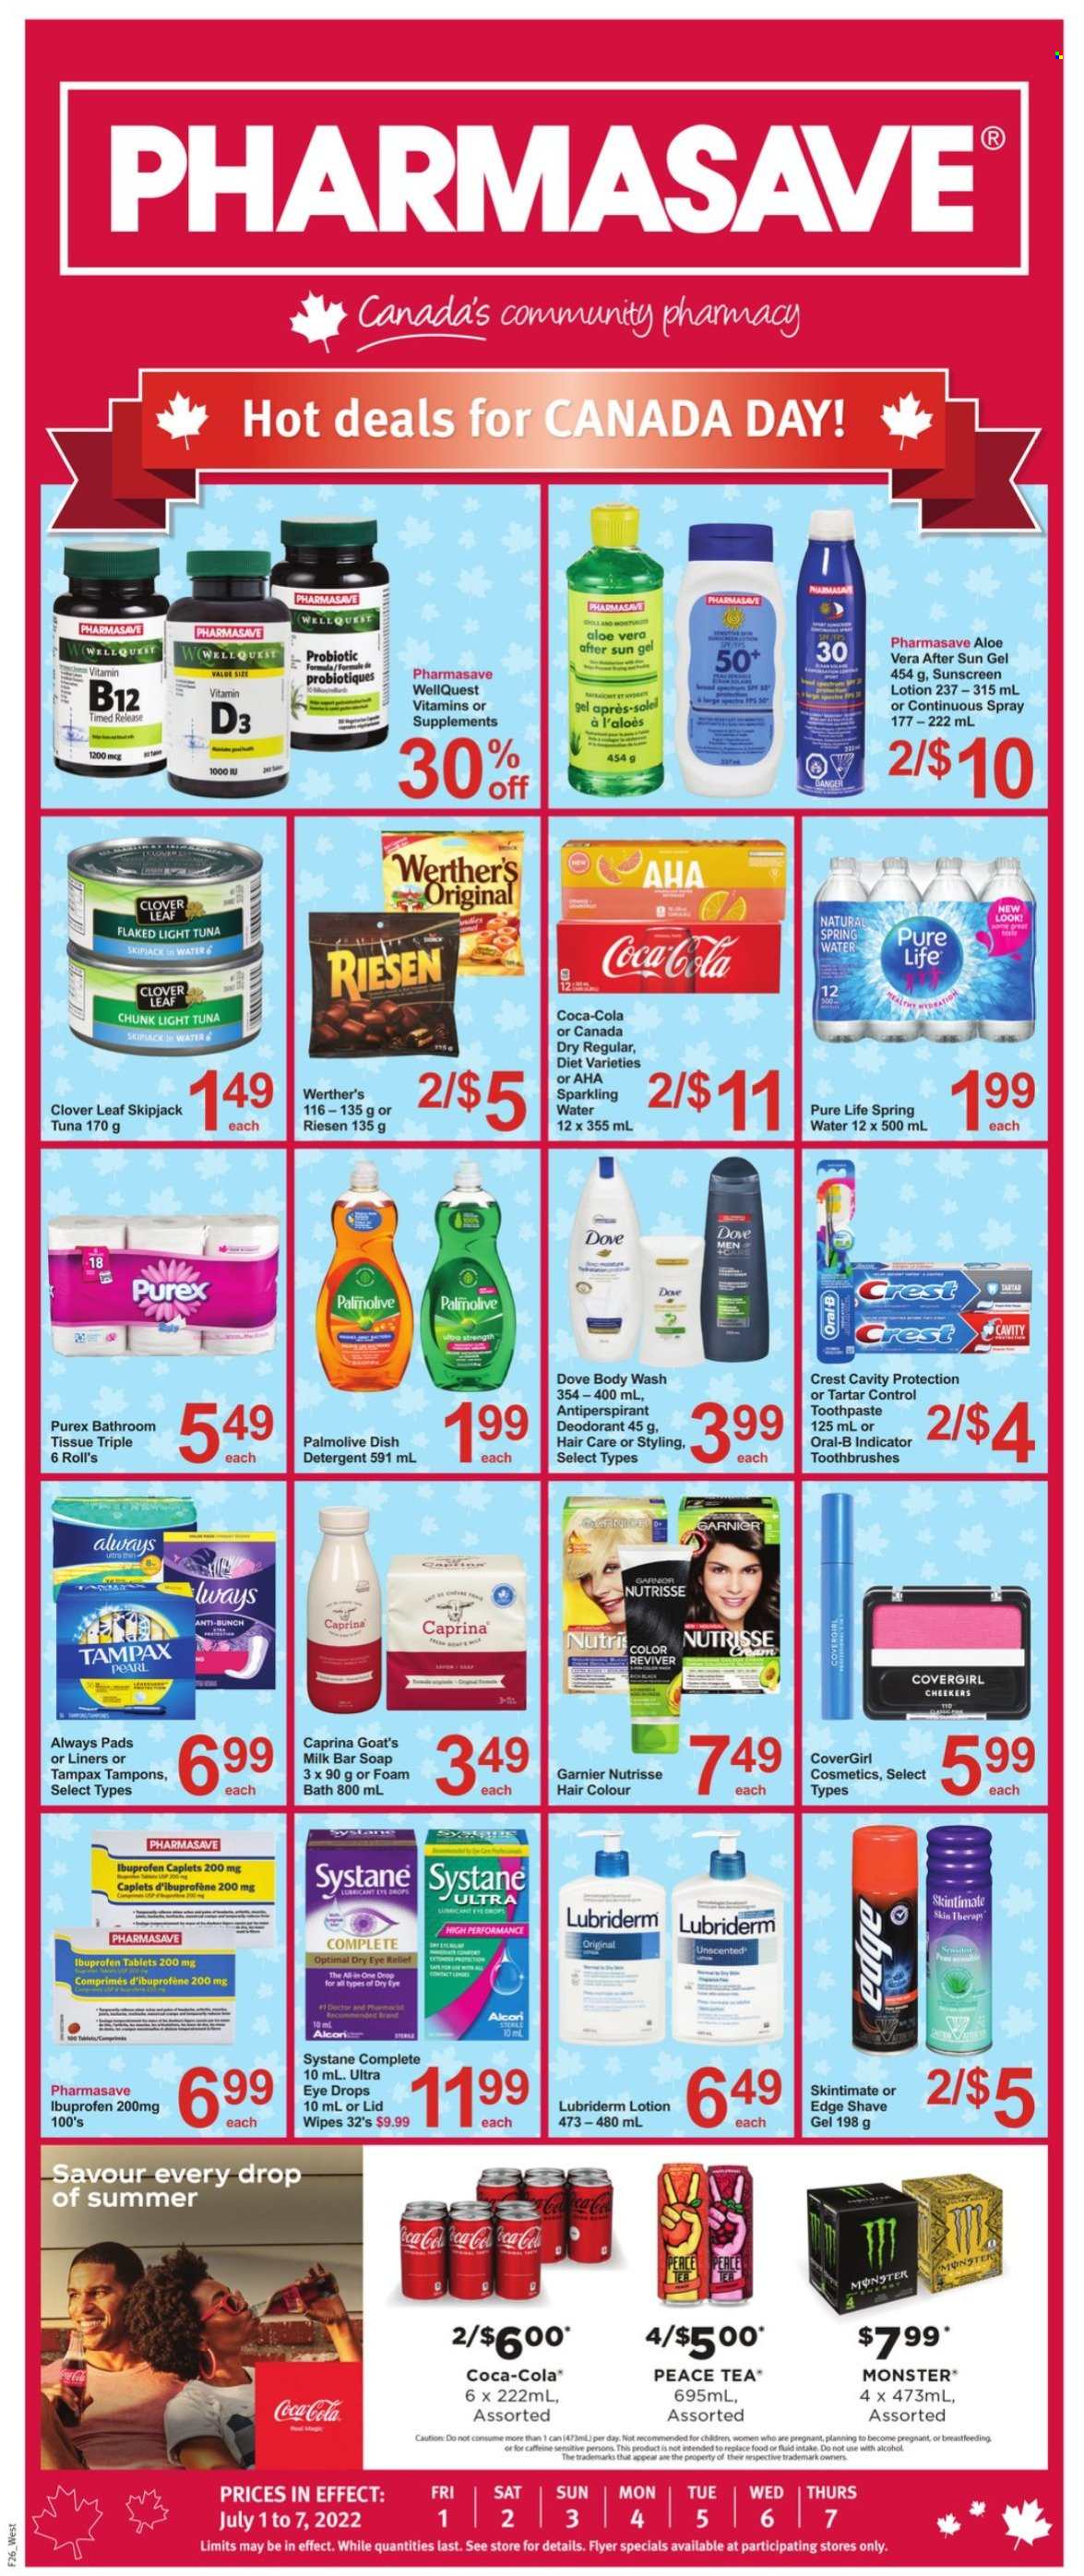 thumbnail - Pharmasave Flyer - July 01, 2022 - July 07, 2022 - Sales products - tuna, Clover, milk, light tuna, Canada Dry, Coca-Cola, Monster, Monster Energy, spring water, sparkling water, tea, wipes, bath tissue, Purex, body wash, bath foam, Palmolive, soap bar, soap, toothpaste, Crest, Always pads, sanitary pads, tampons, hair color, body lotion, Lubriderm, sunscreen lotion, anti-perspirant, shave gel, lubricant, lid, Ibuprofen, eye drops, vitamin B12, vitamin D3, lenses, contact lenses, detergent, Dove, Garnier, Systane, Tampax, Oral-B, deodorant. Page 1.